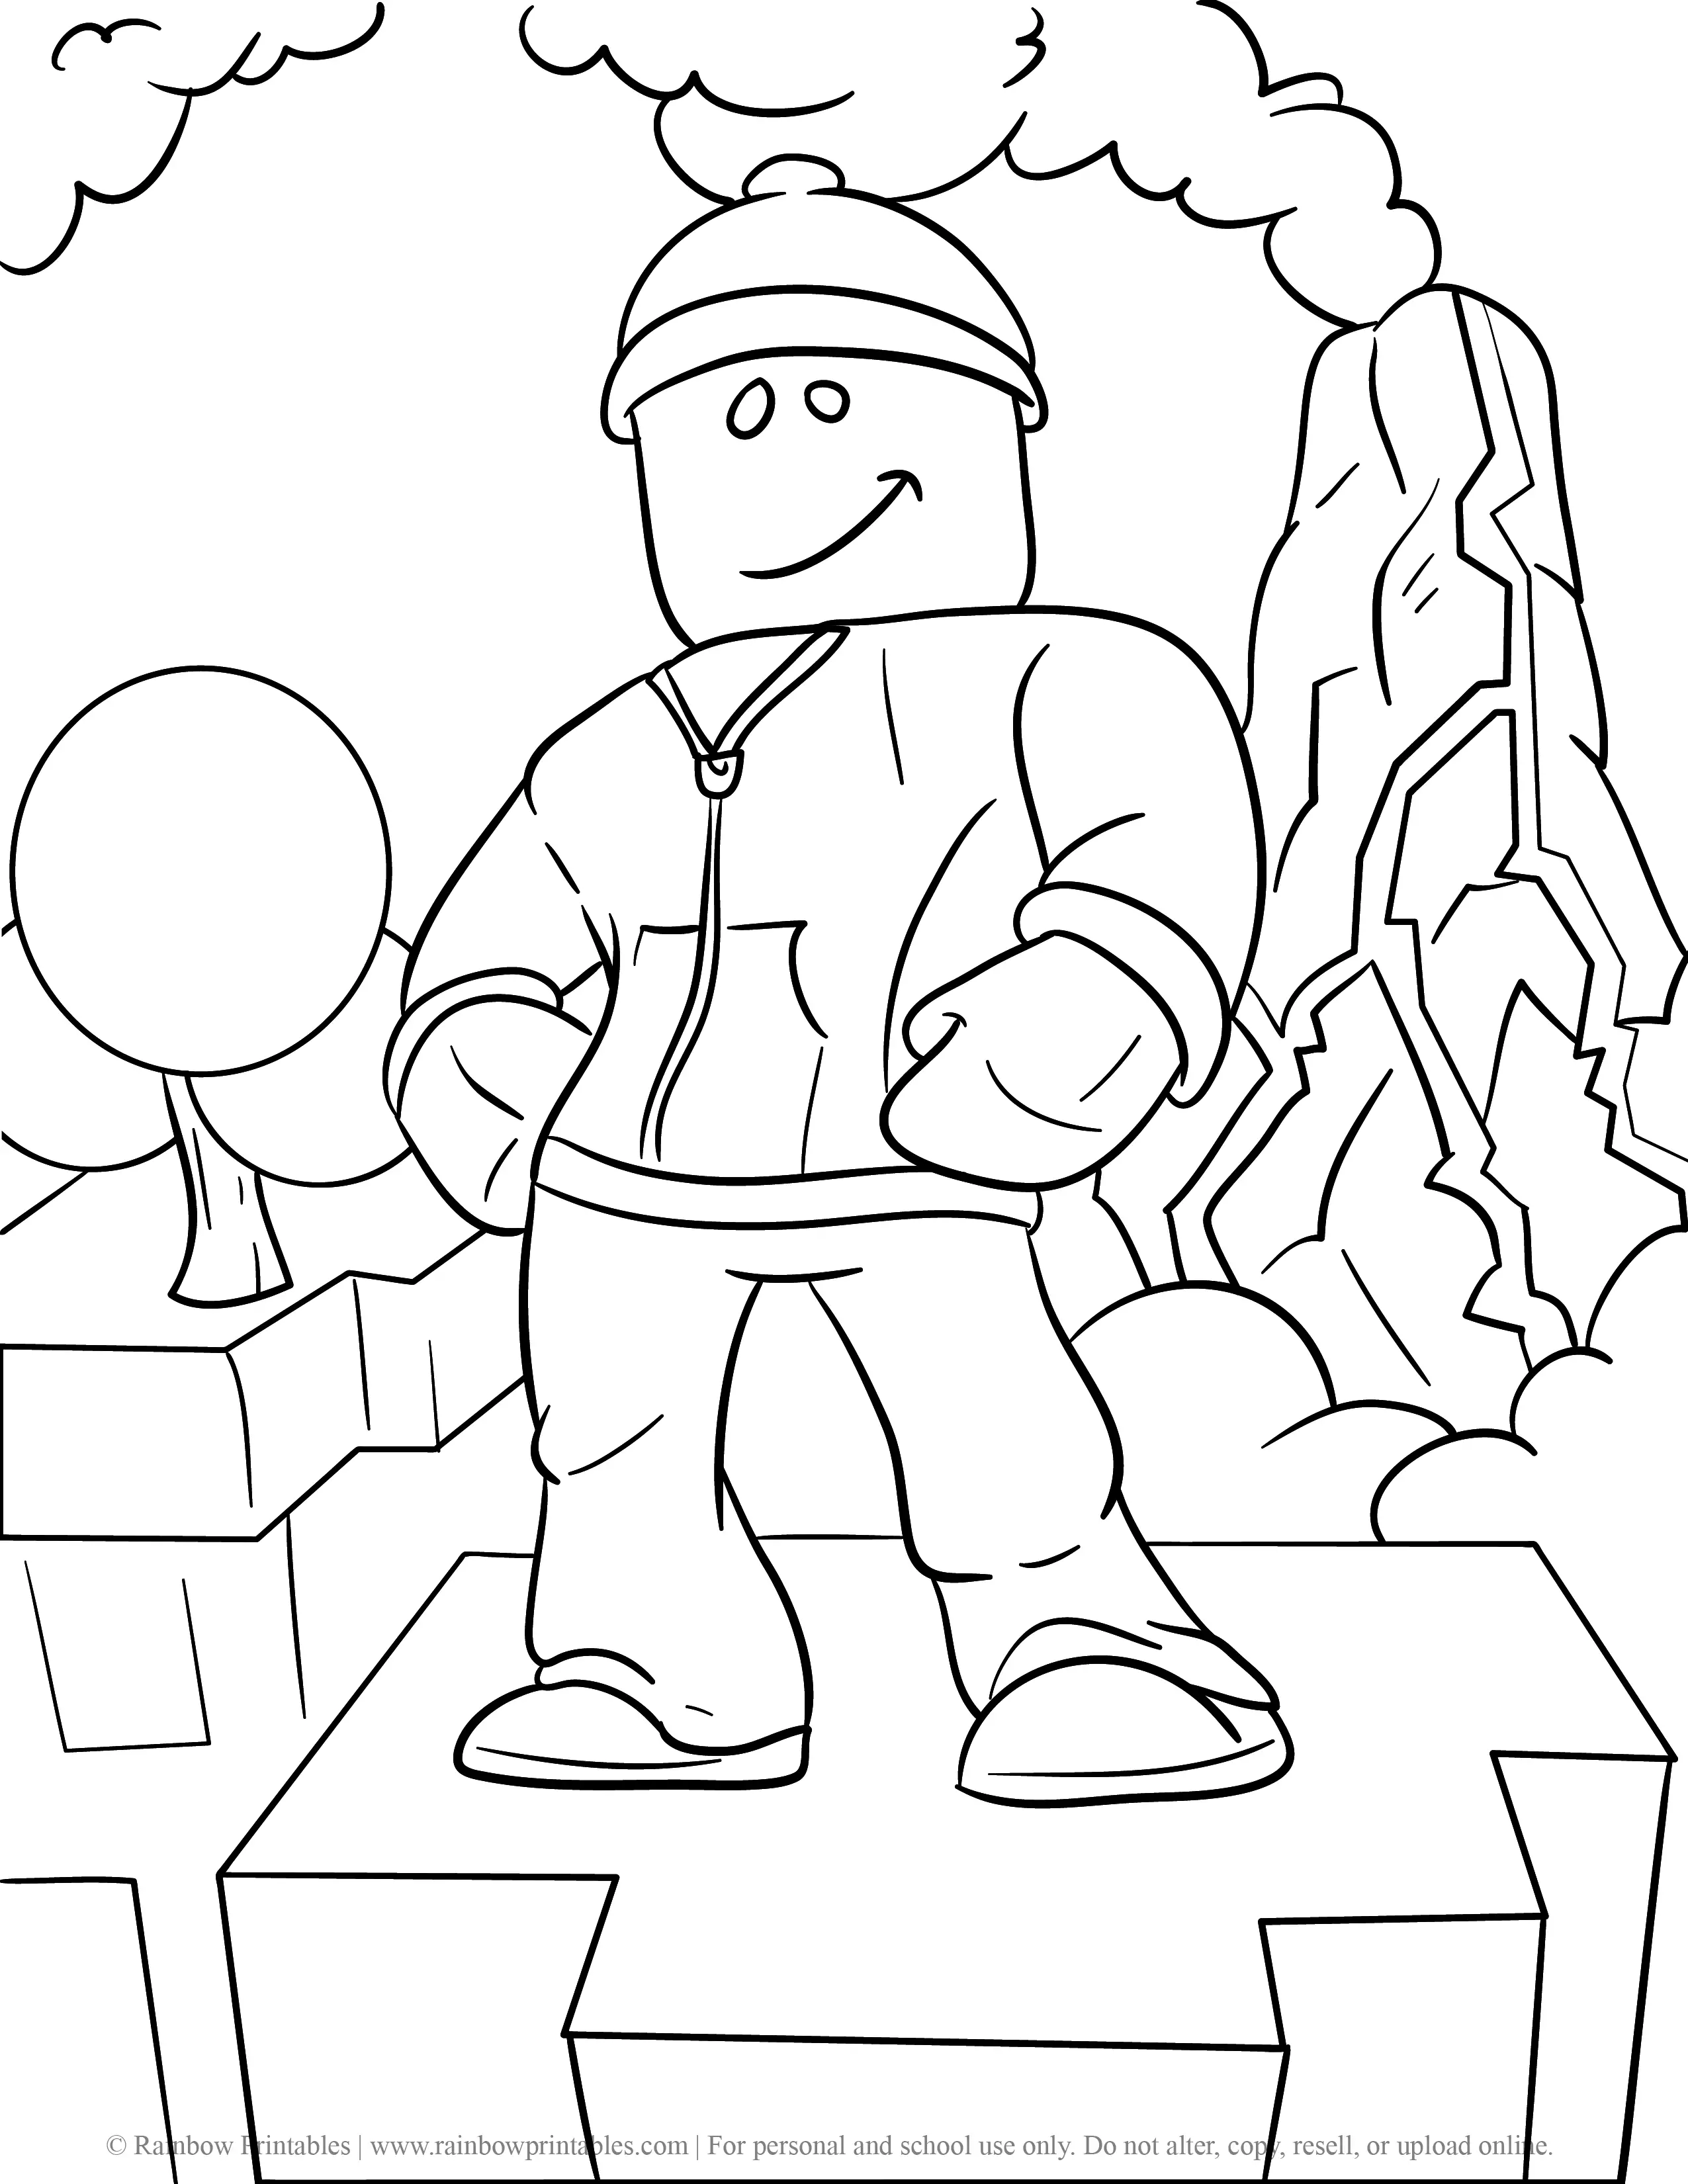 3 Free Roblox Character Inspired Coloring Pages for Kids